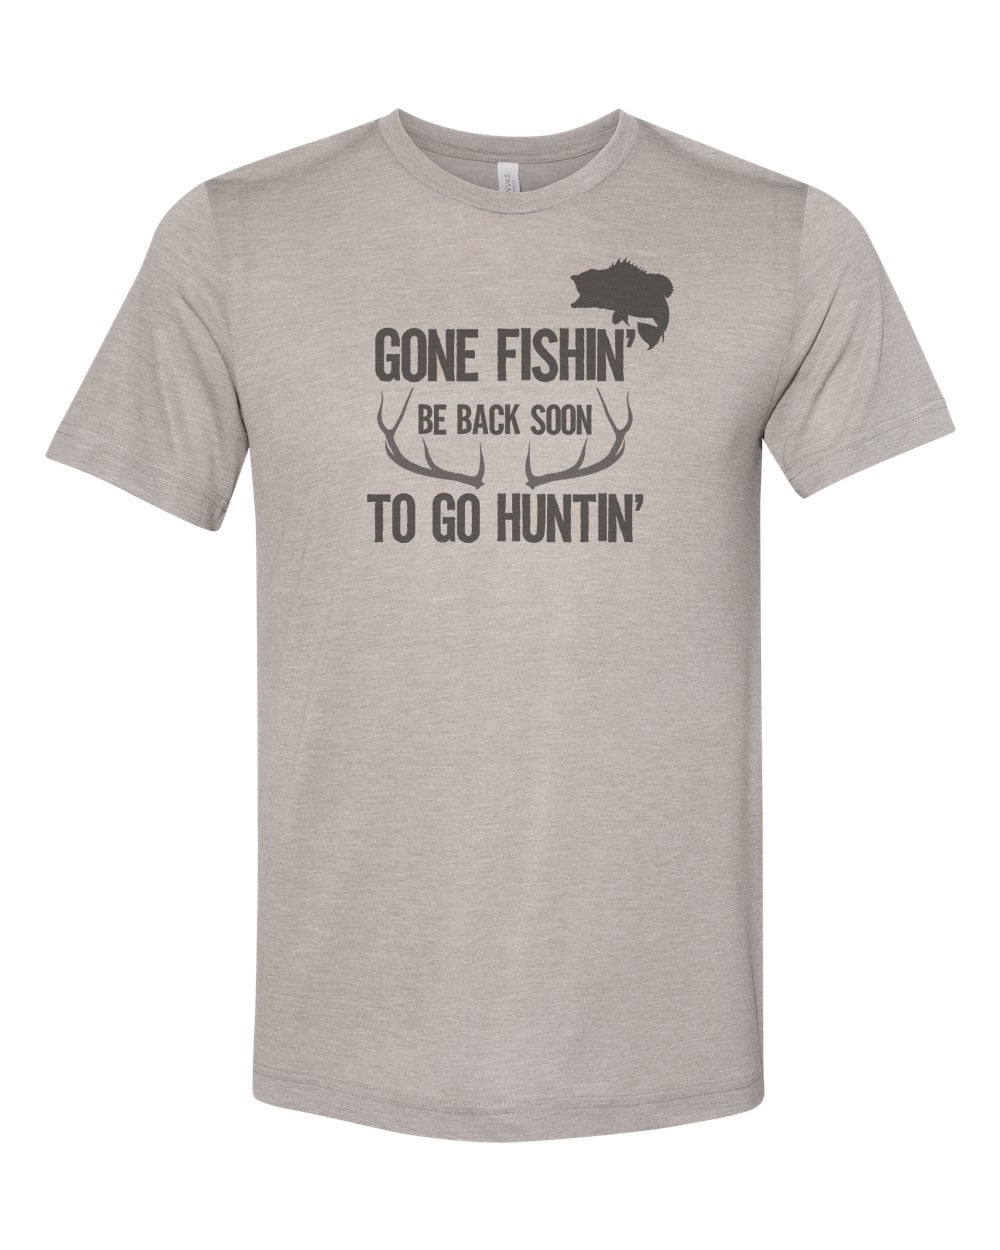 Hunting And Fishing Shirt, Gone Fishin' Be Back To Soon To Go Huntin',  Sublimation Tee, Fishing Shirt, Hunting Shirt, Dad Tee, Father's Day,  Heather